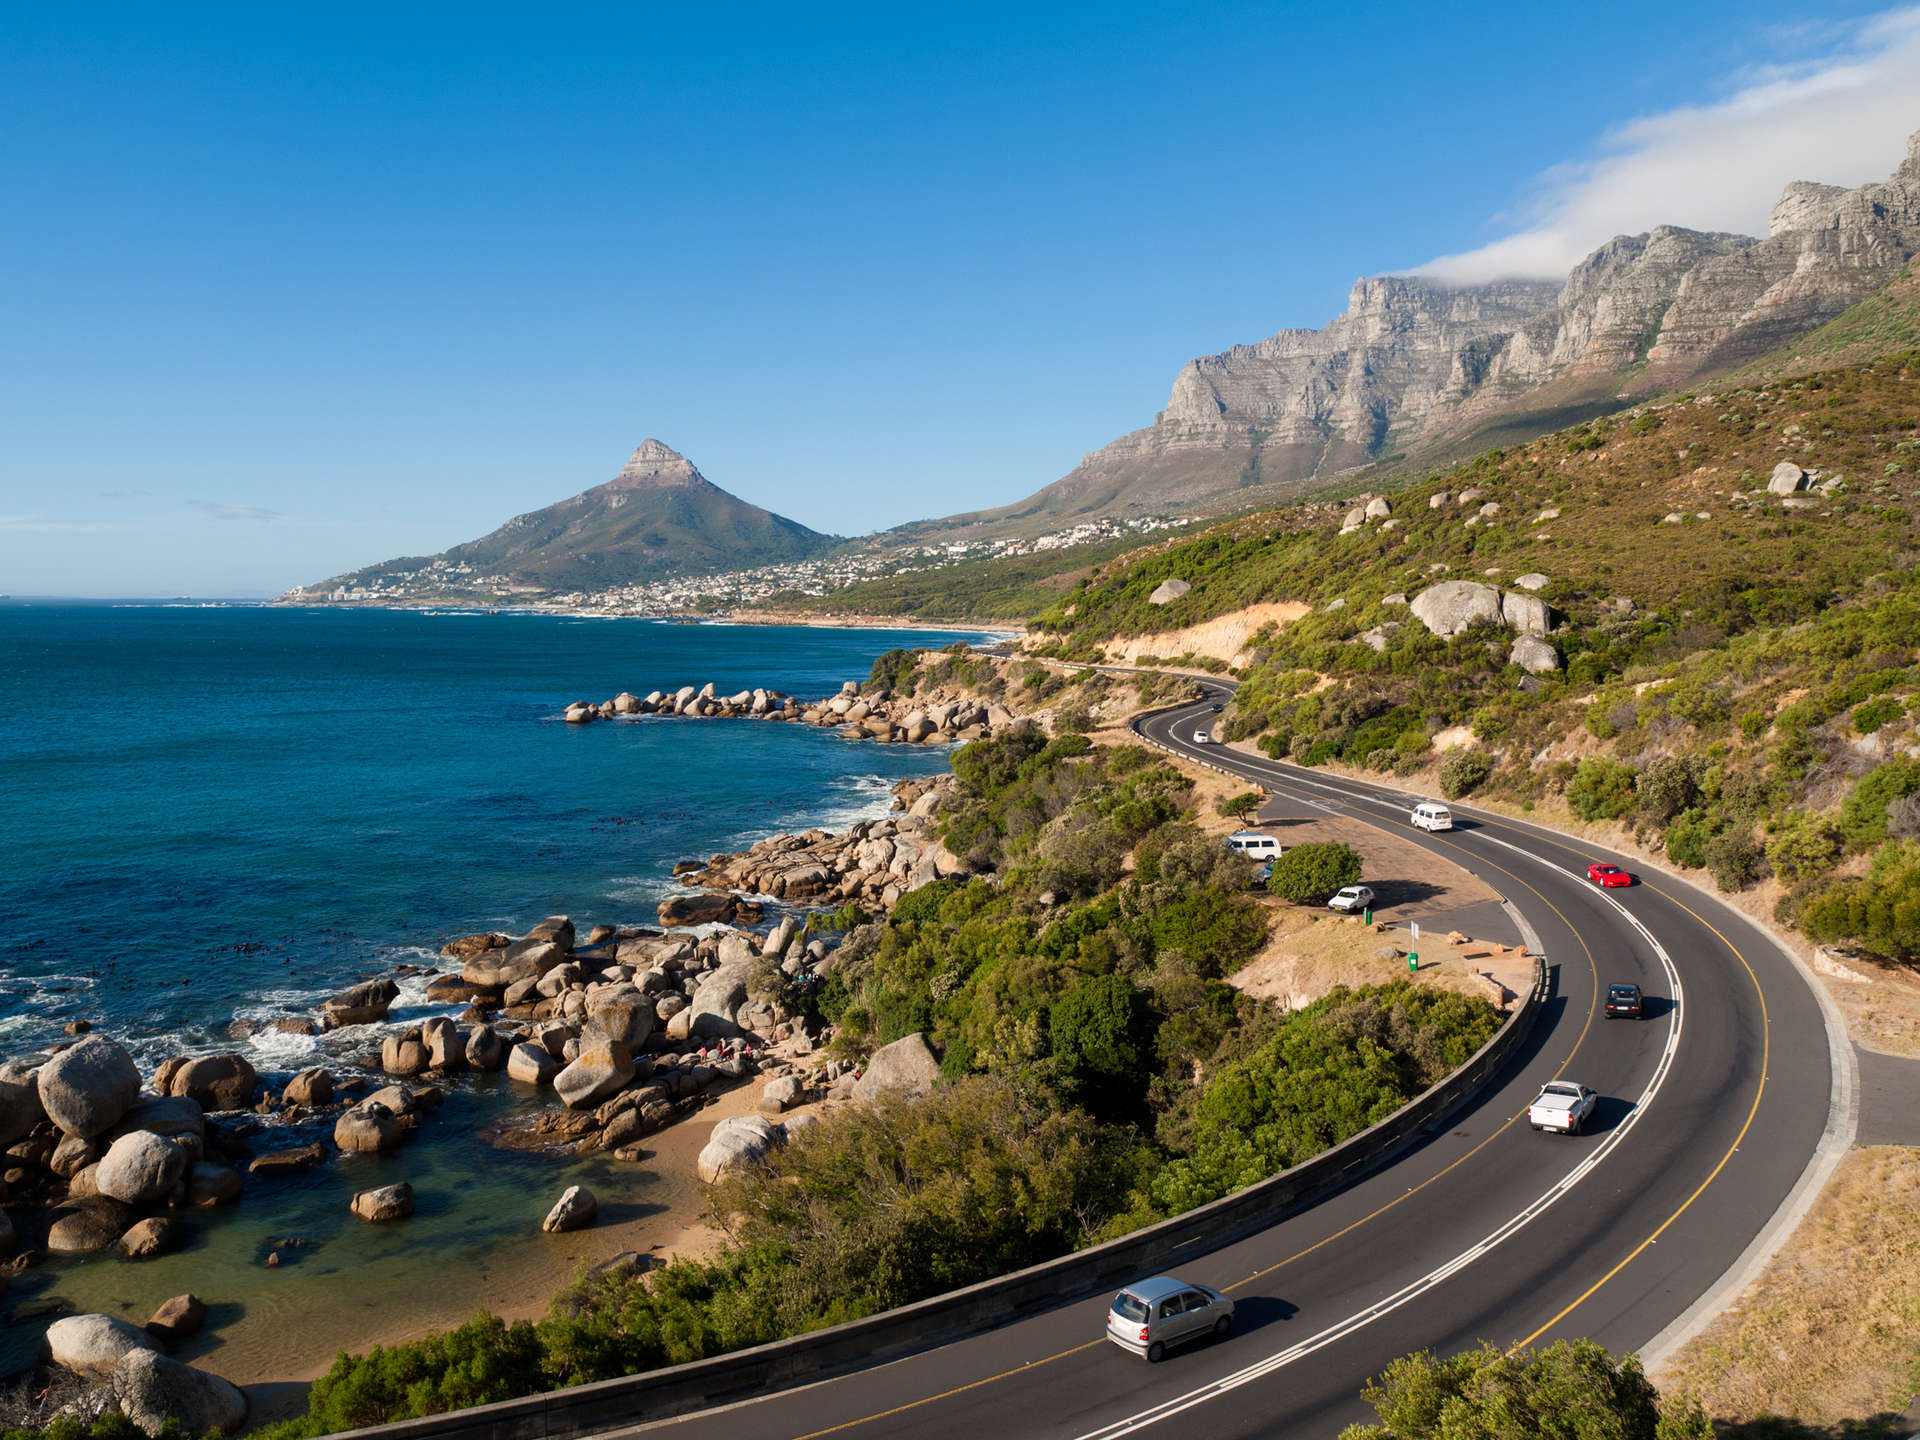 January is the perfect time to visit the South African Cape